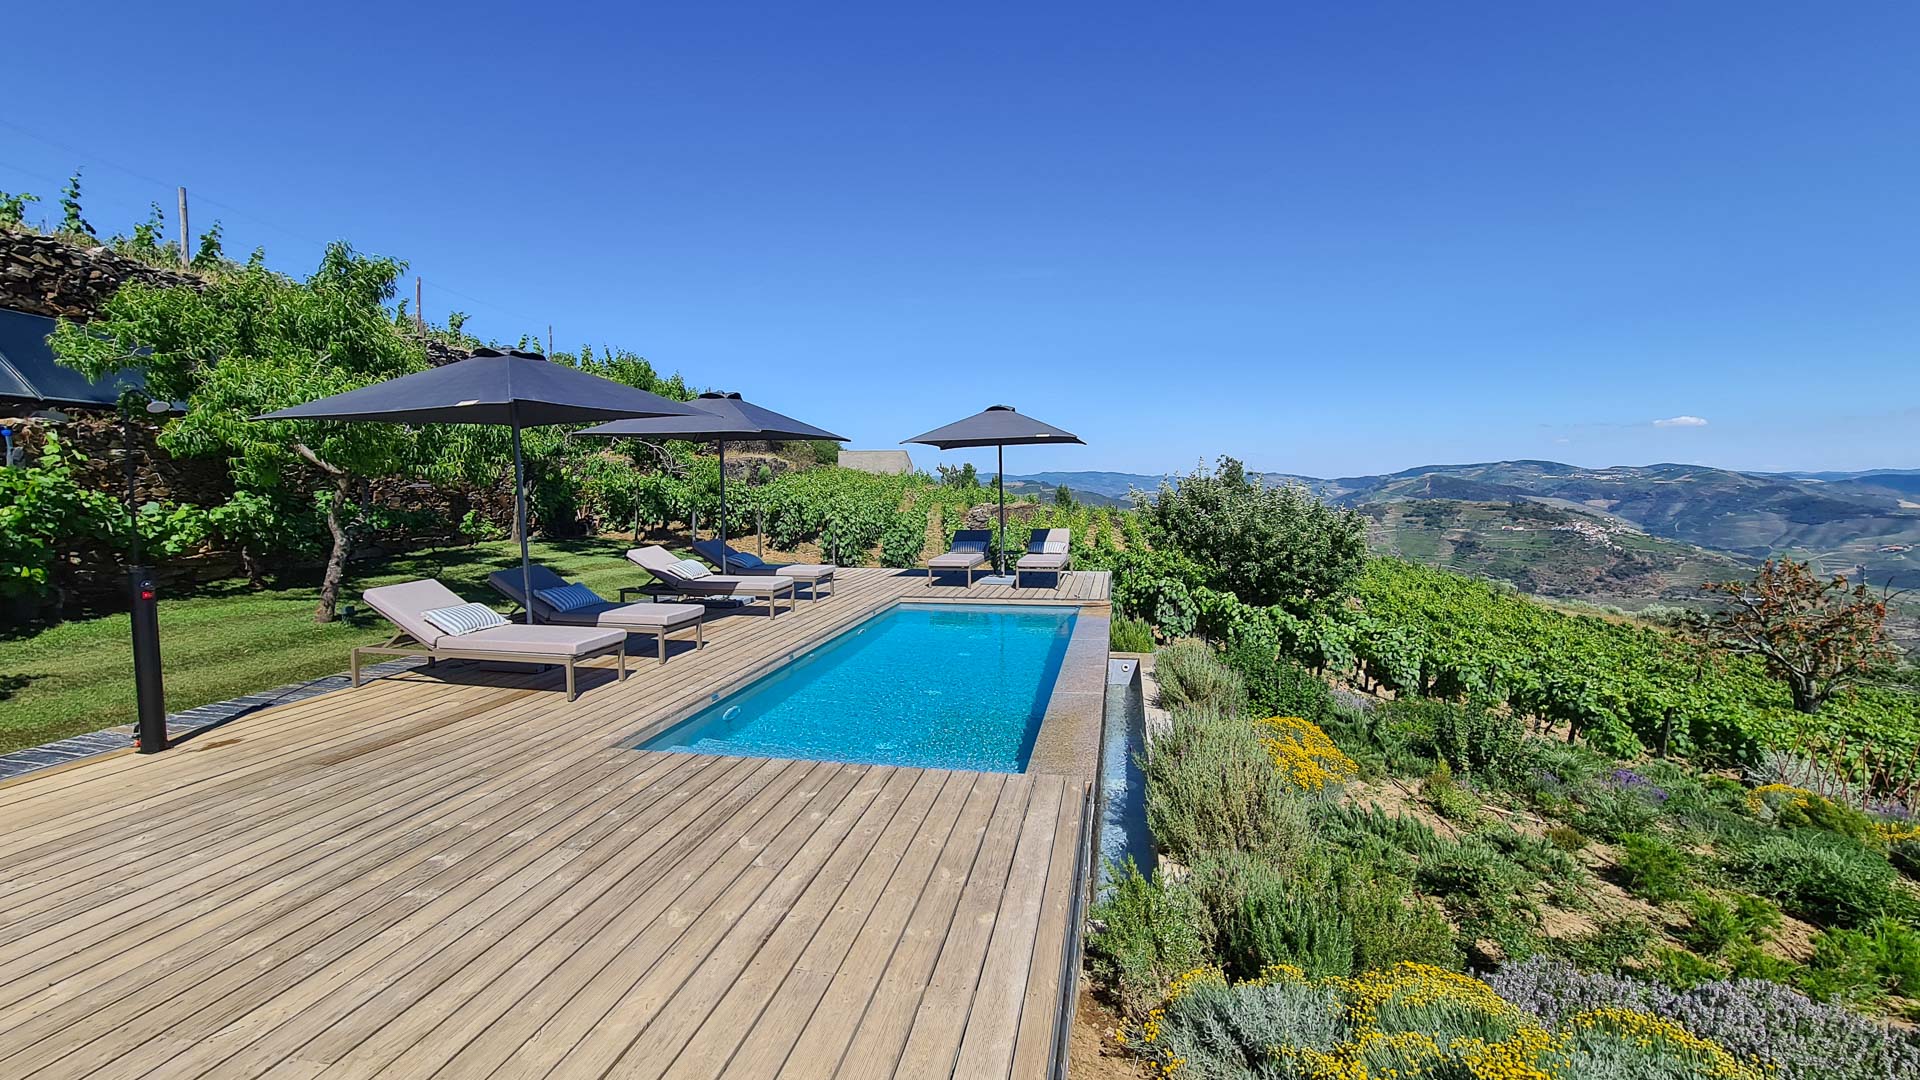 Property Image 2 - Douro Valley Rental Home with Sweeping Vistas and Pool